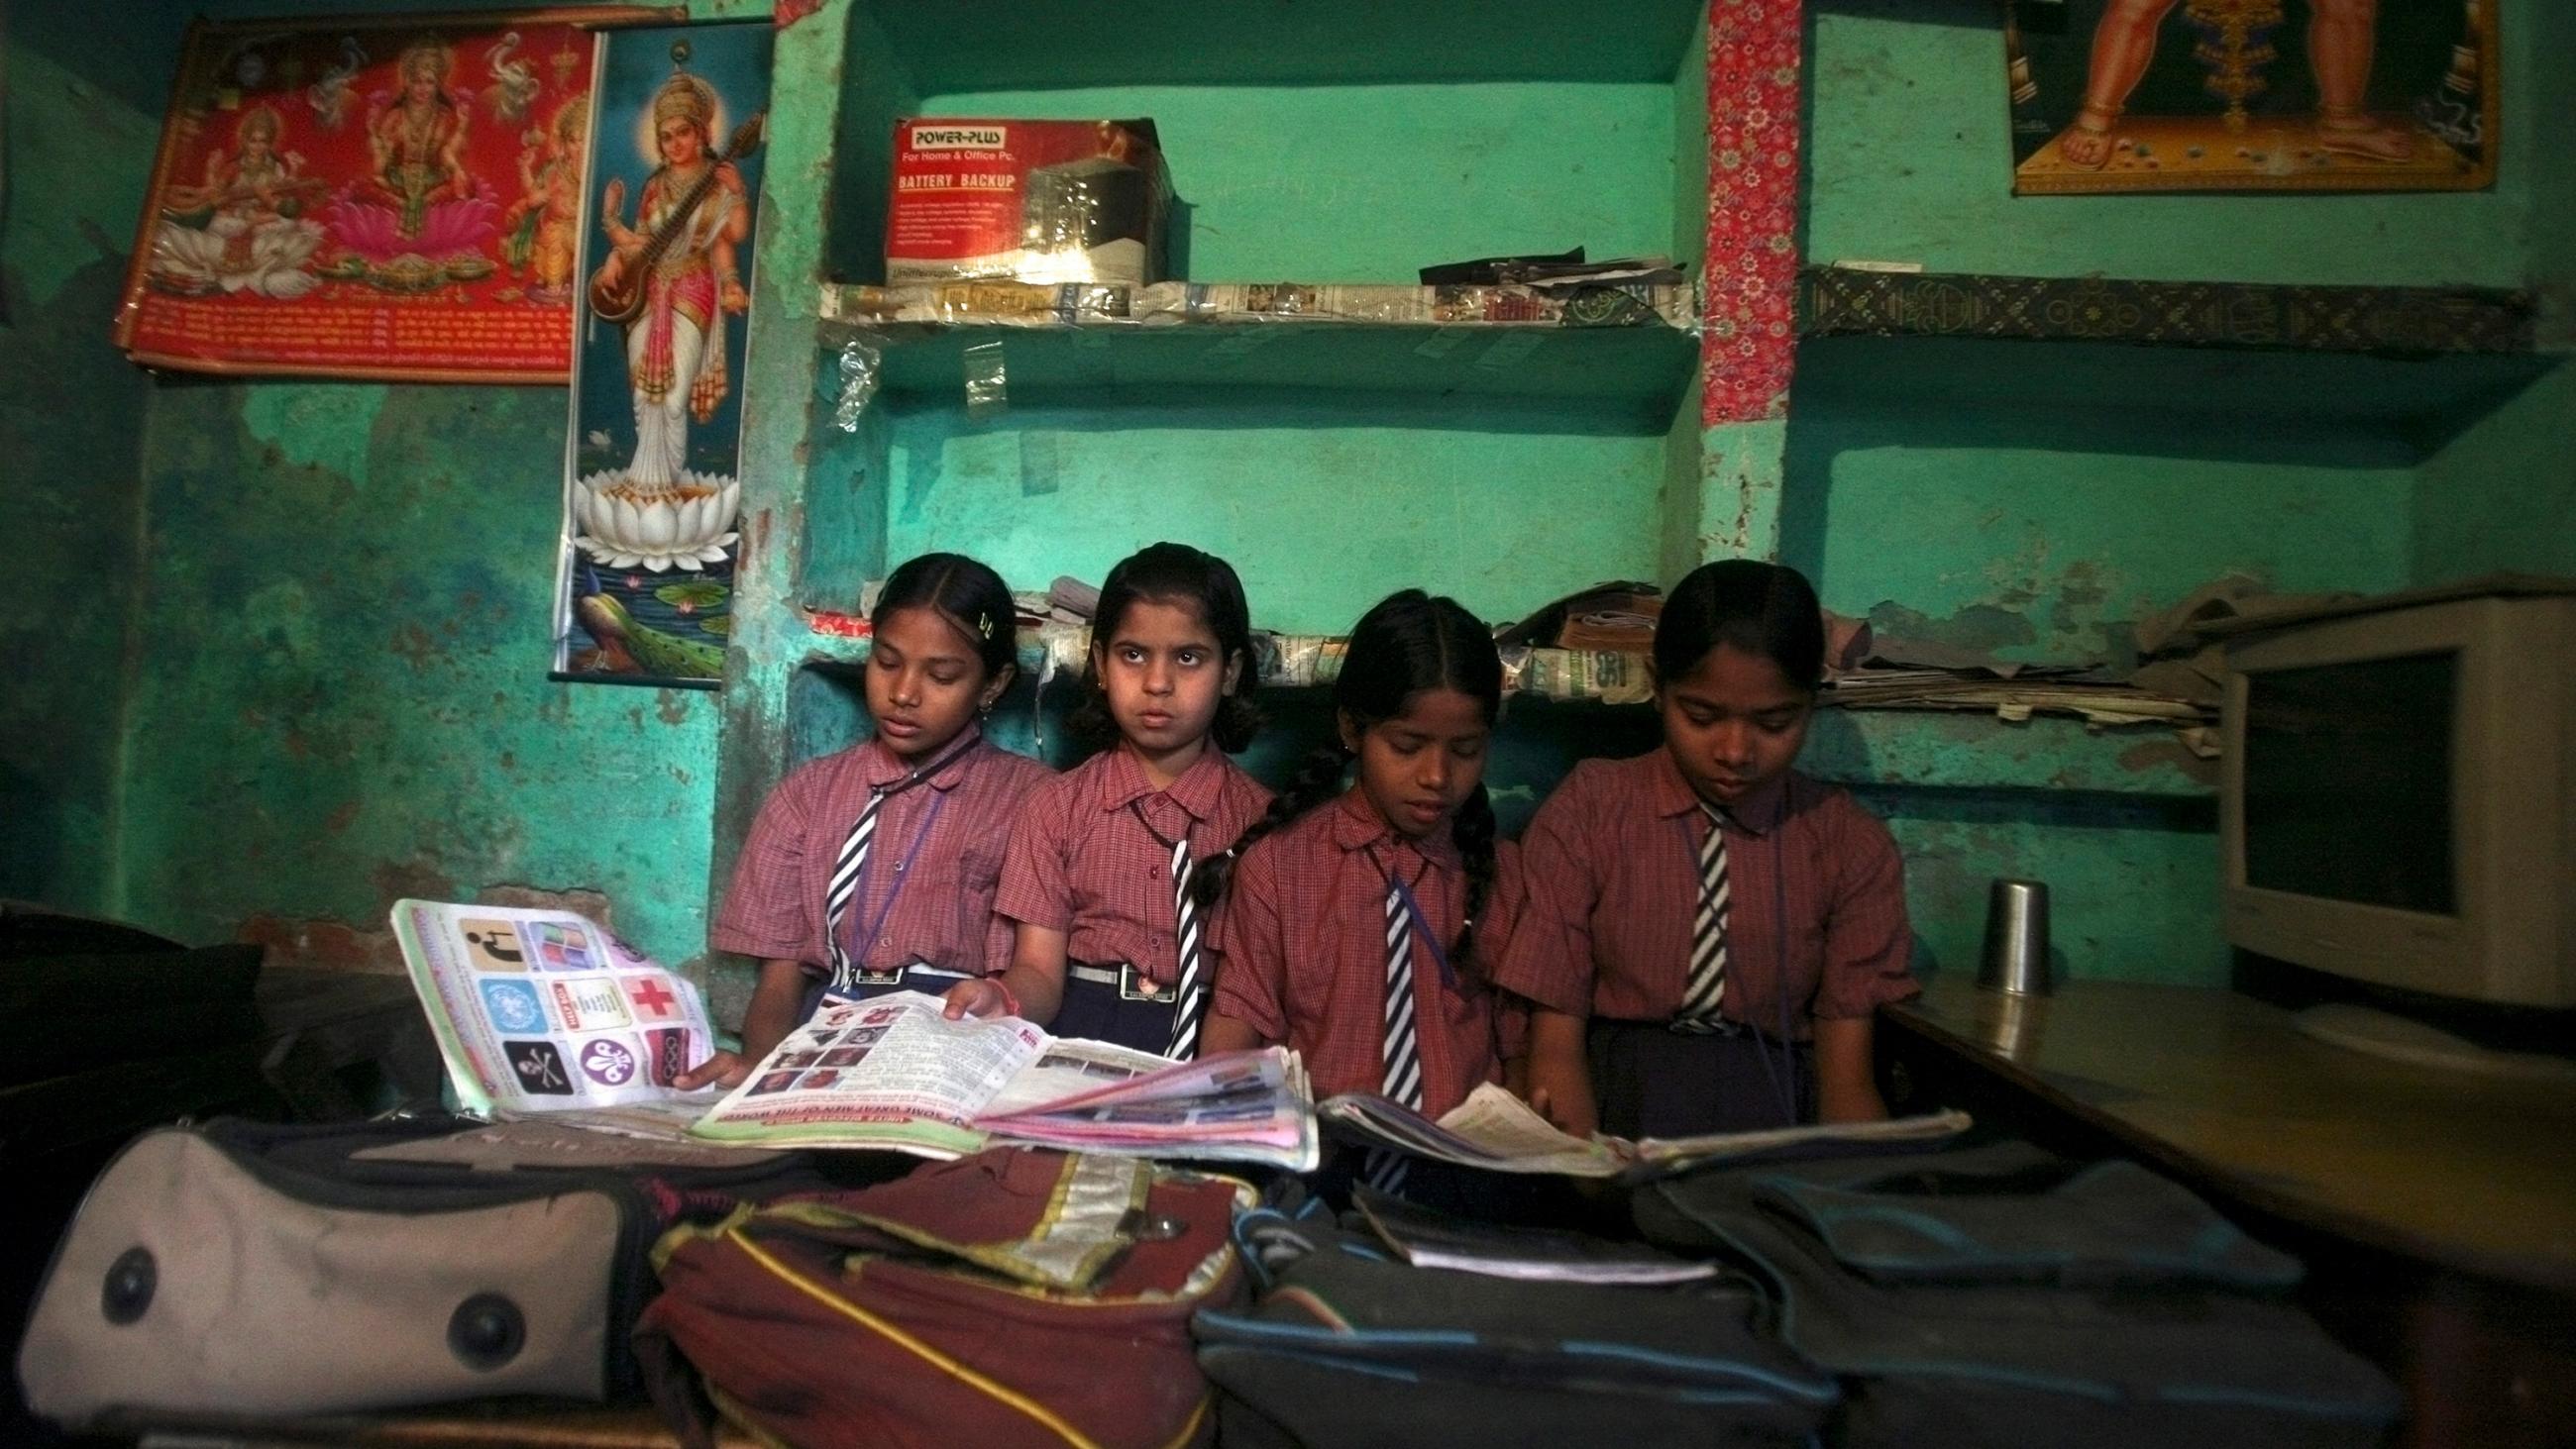 Image show four girls sitting close to each other with their heads buried in books, except one who looks up and off camera. The walls of the school are painted green. 